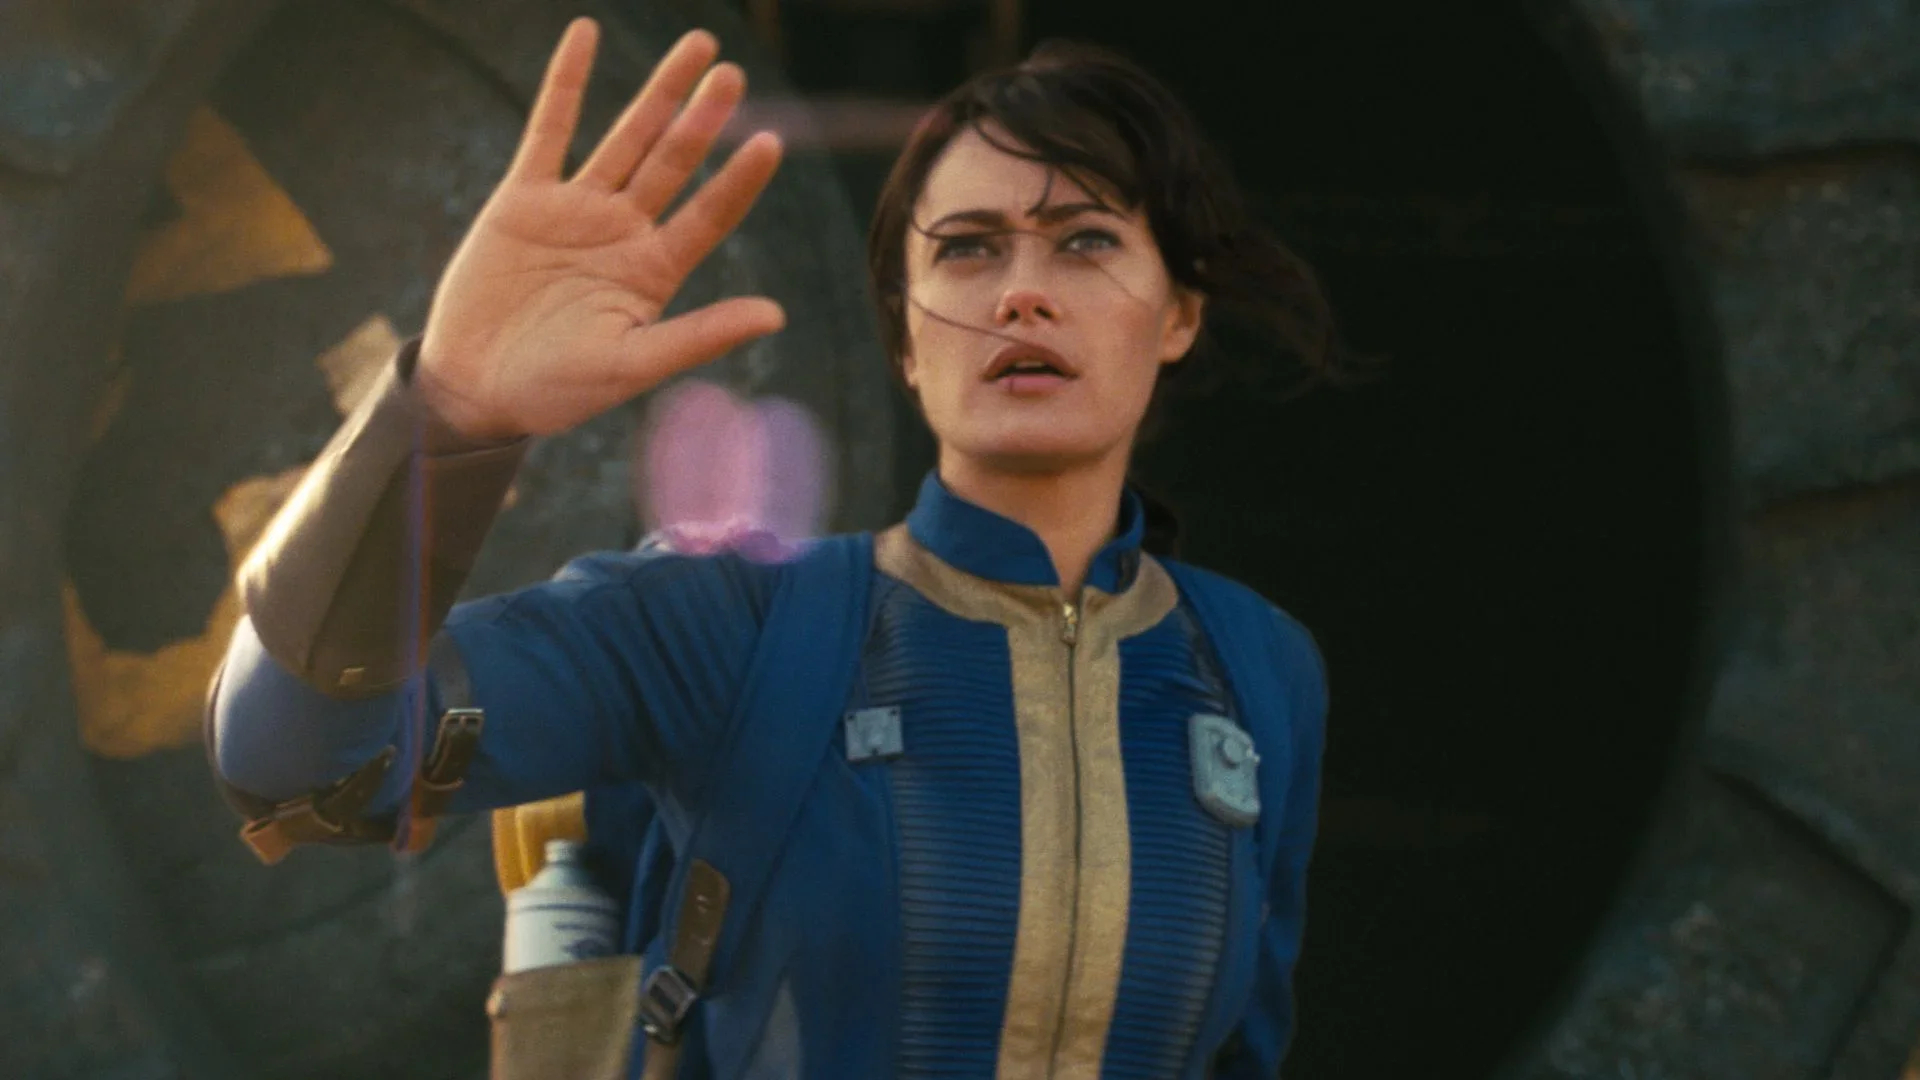 Marvel artist showed the heroine Lucy from the Fallout series in comic book style